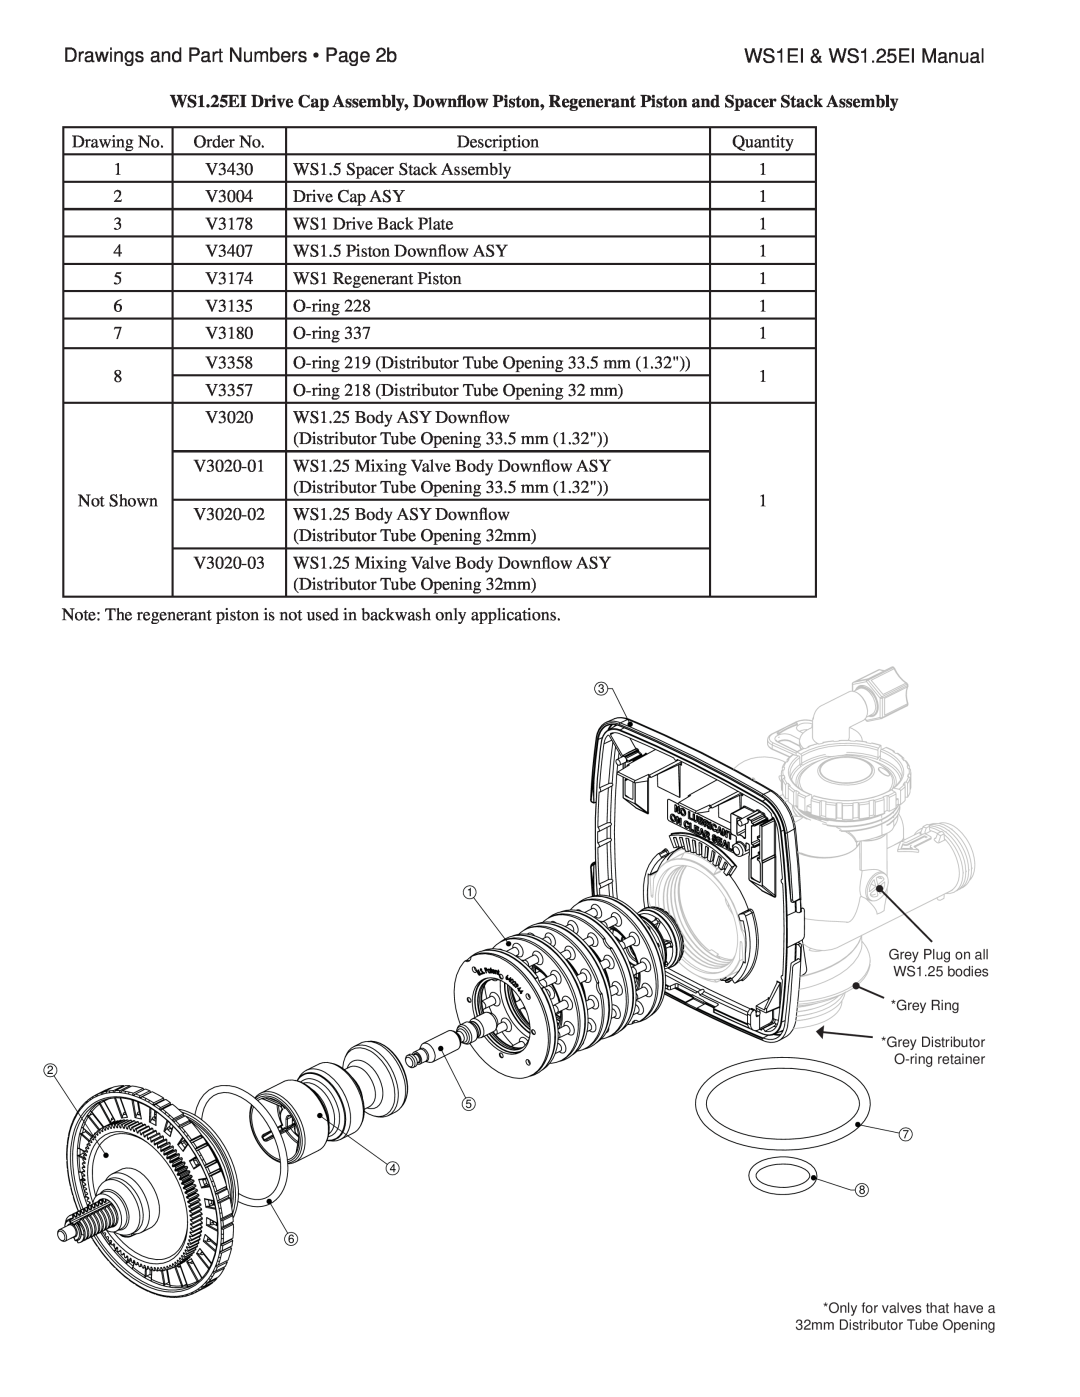 OEM Systems Drawings and Part Numbers Page 2b, WS1EI & WS1.25EI Manual, Grey Plug on all WS1.25 bodies Grey Ring 